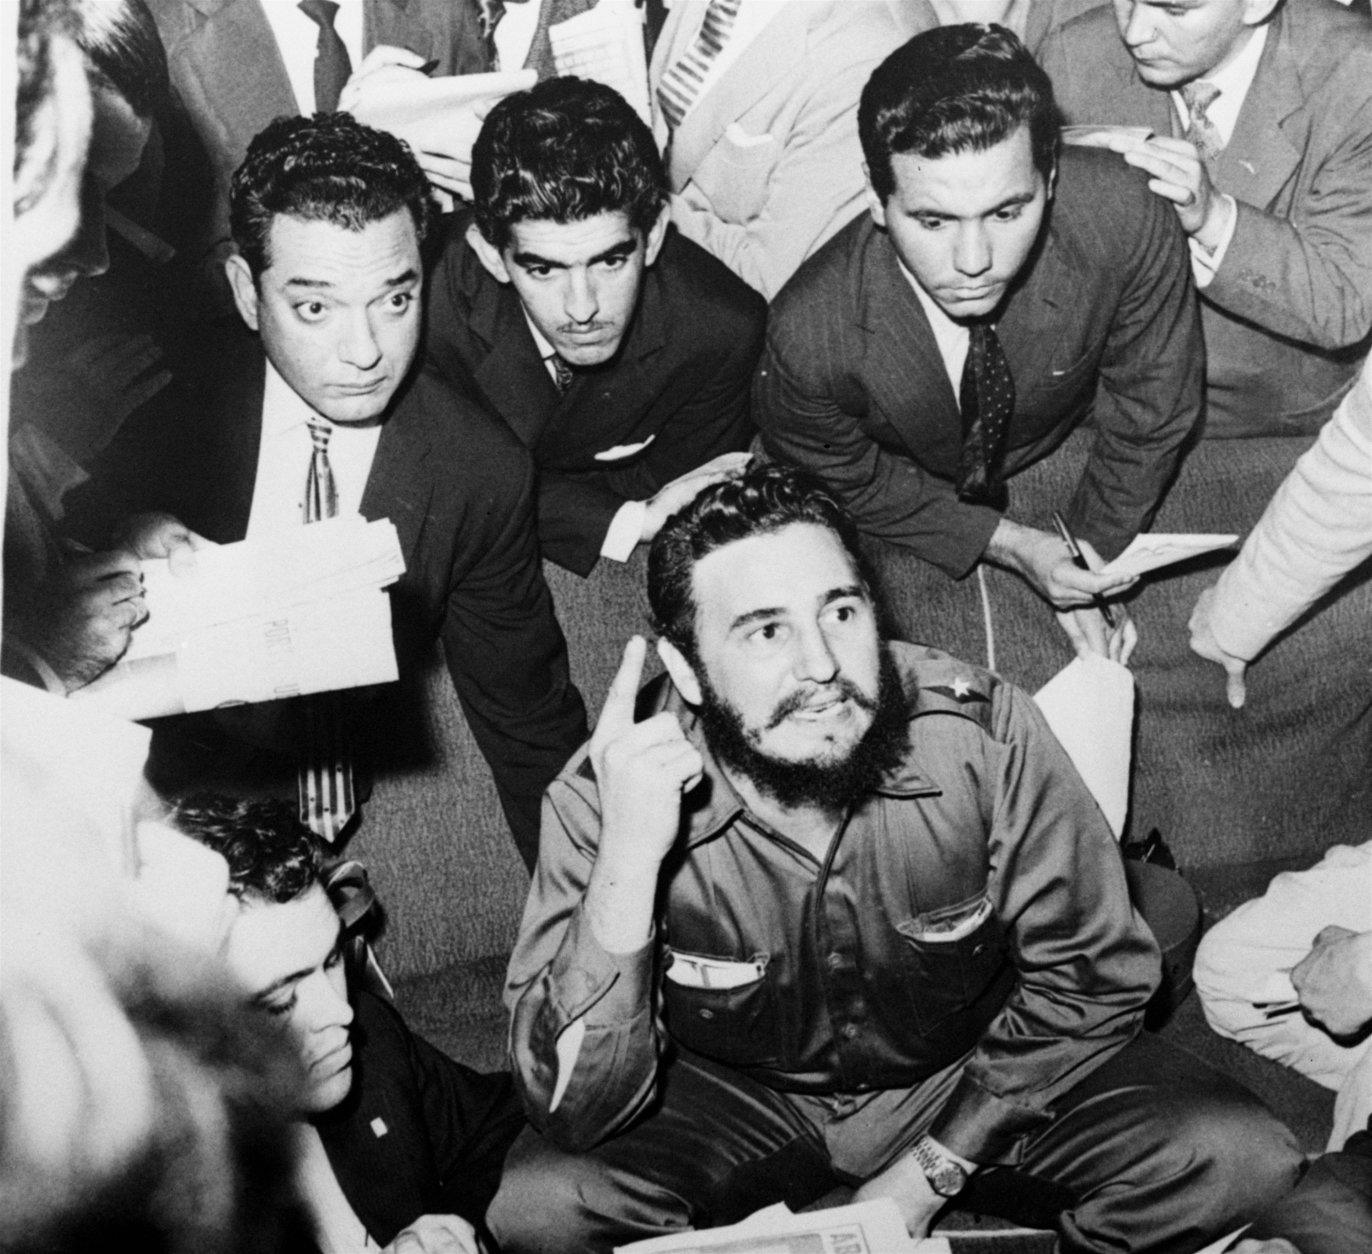 At the Hotel Excelsior, in Sao Paulo, Brazil, Fidel Castro holds a brief news conference, April 30, 1959, in which he said: "Batista [former dictator Fulgencio Batista] will not come back. He is definitely destroyed as a politician."  (AP Photo)